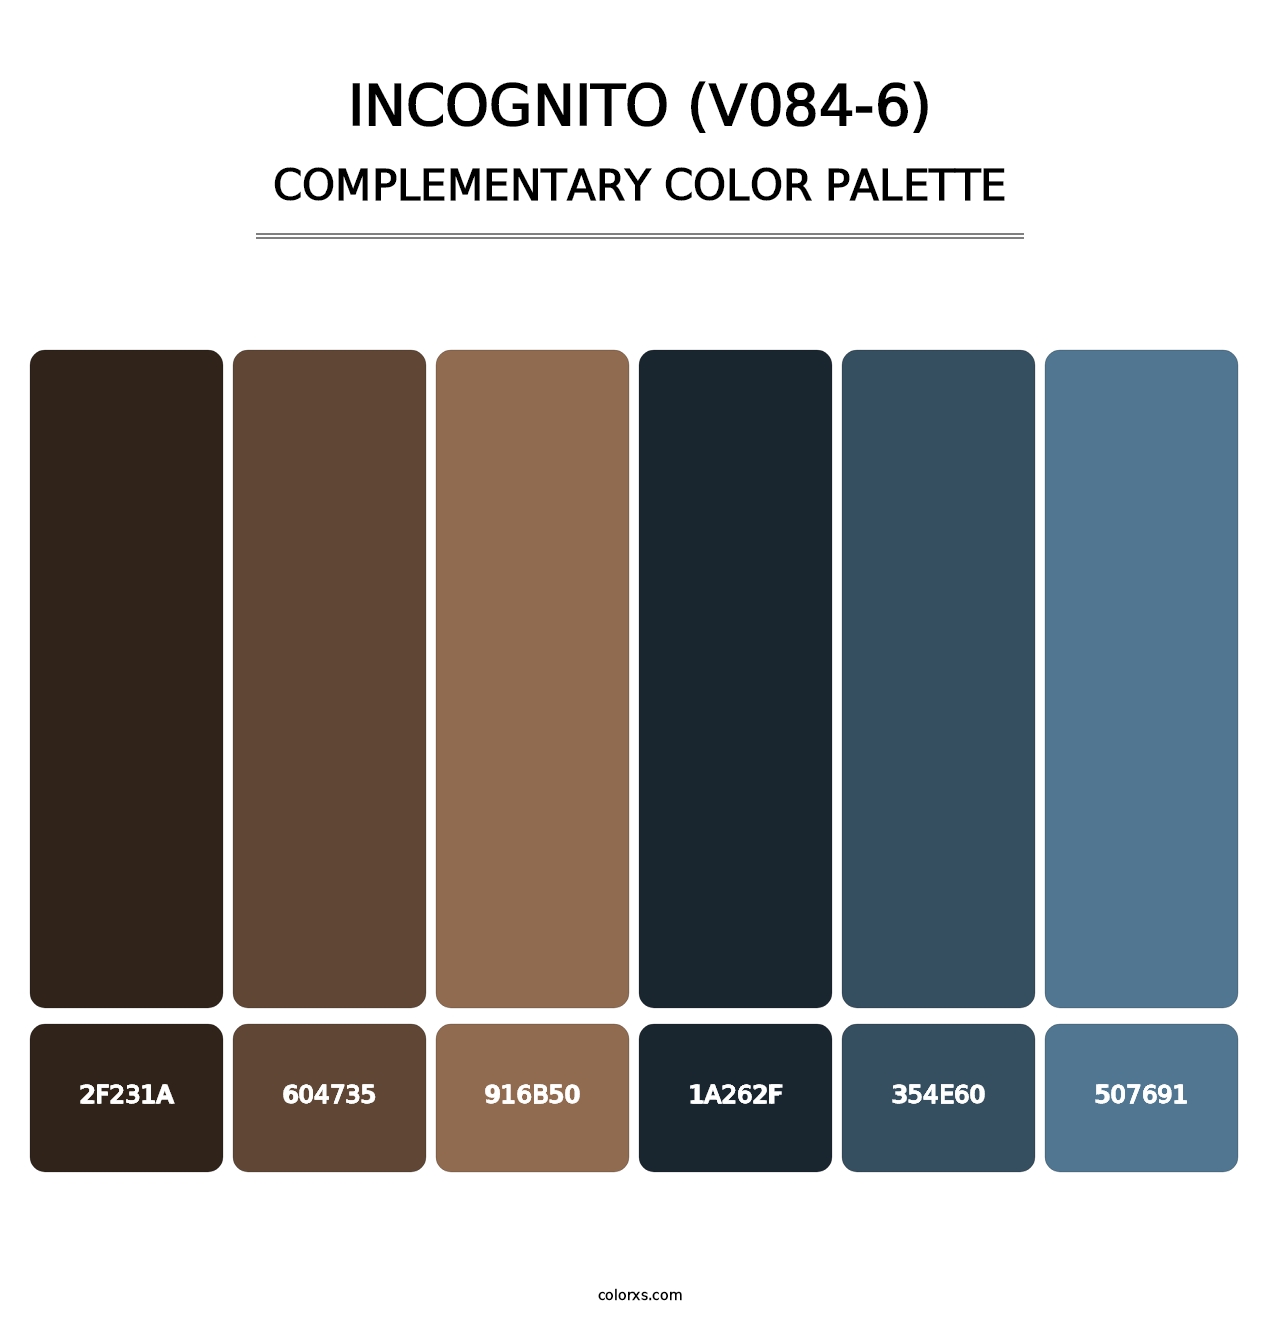 Incognito (V084-6) - Complementary Color Palette